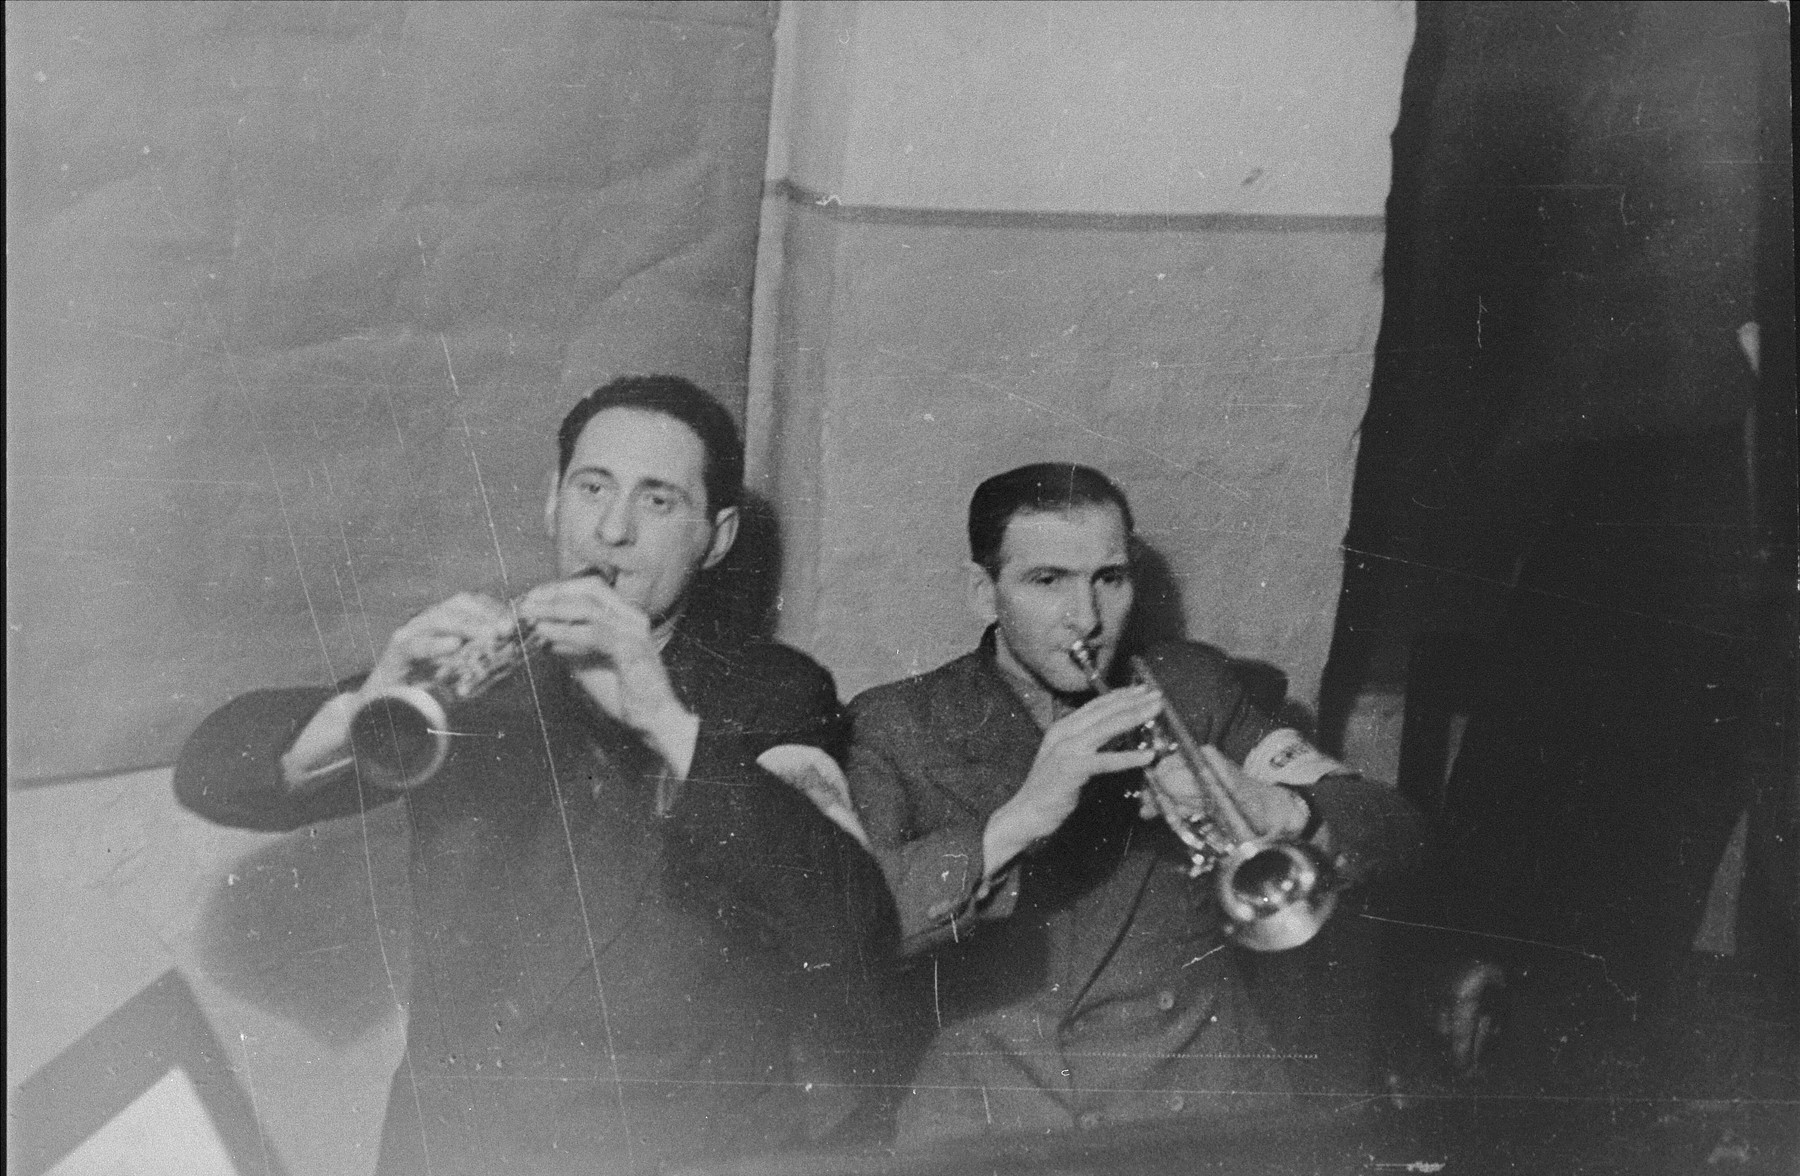 Performance by two members of the Kovno ghetto orchestra.

Pictured are Yerachmiel Wolfberg and Yitzhak Borstein.